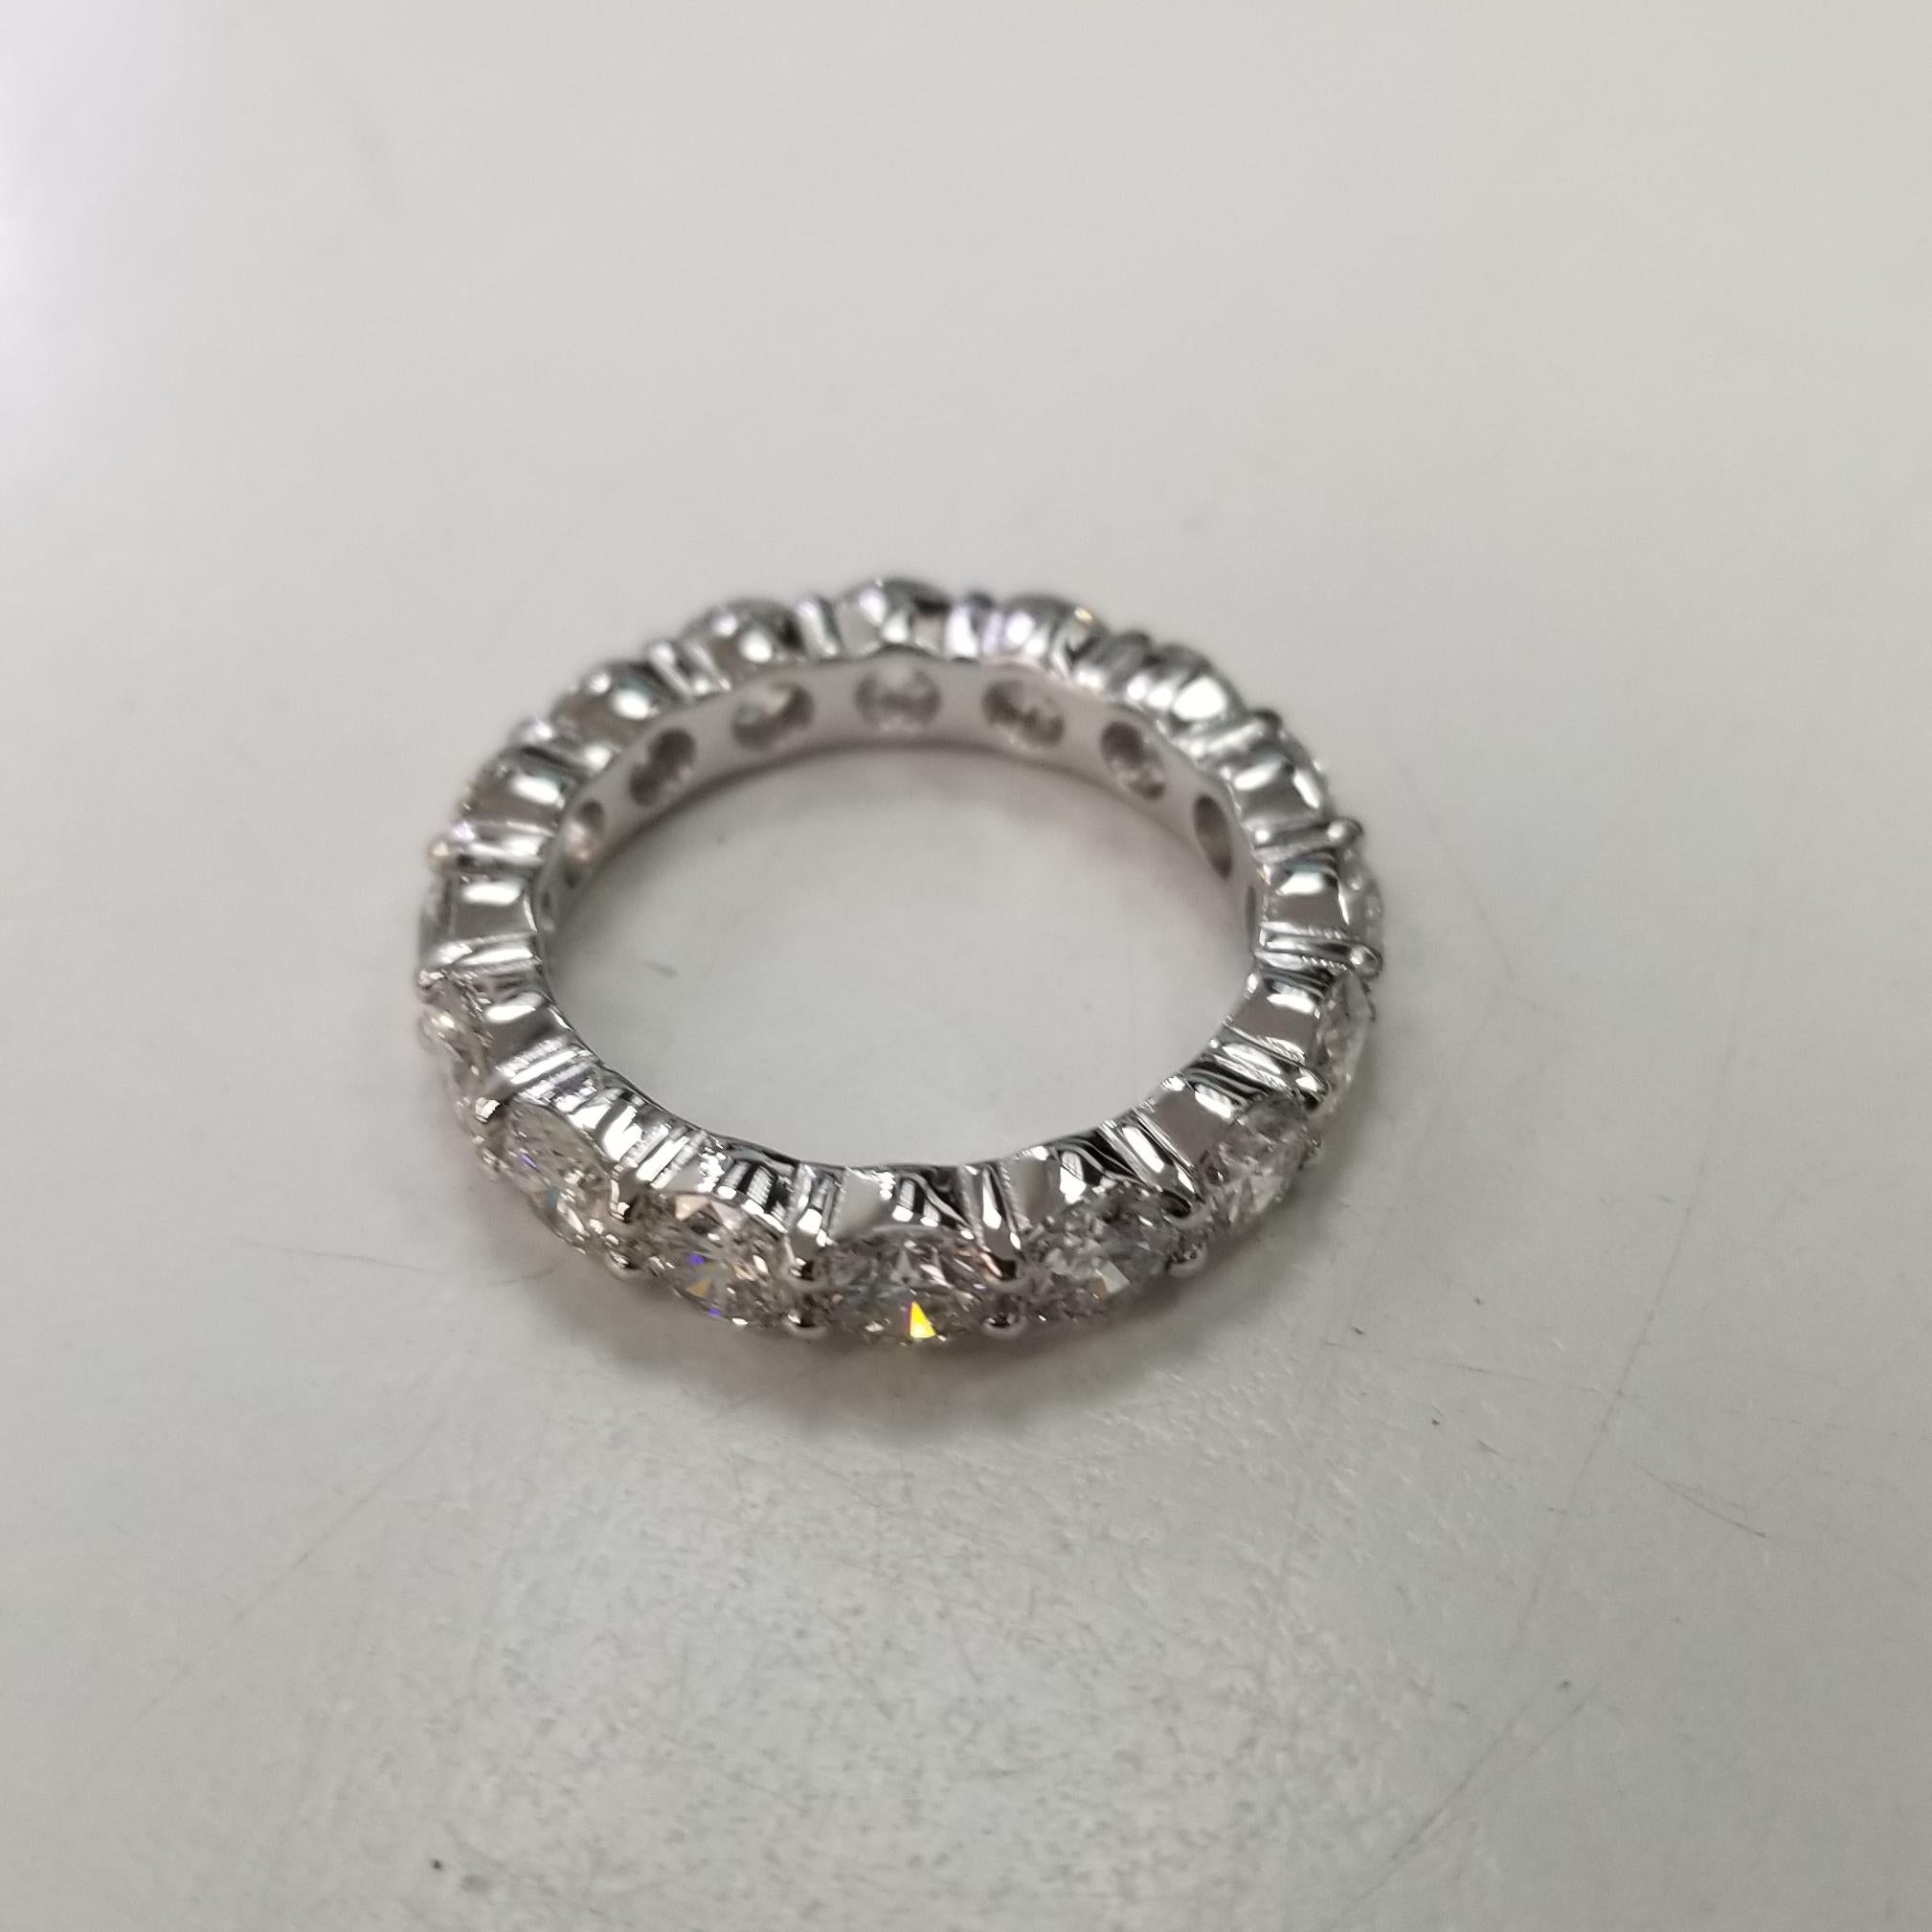  BRILLIANTL CUT DIAMOND ETERNITY RING IN 14k WHITE GOLD 3.51 CTW 
Specifications:
    main stone: BRILLIANT CUT DIAMOND
    diamonds: 16 PIECES
    carat total weight: 3.51
    color: -G
    clarity: VS2
    brand: UNBRANDED
    metal: 14k
    type: